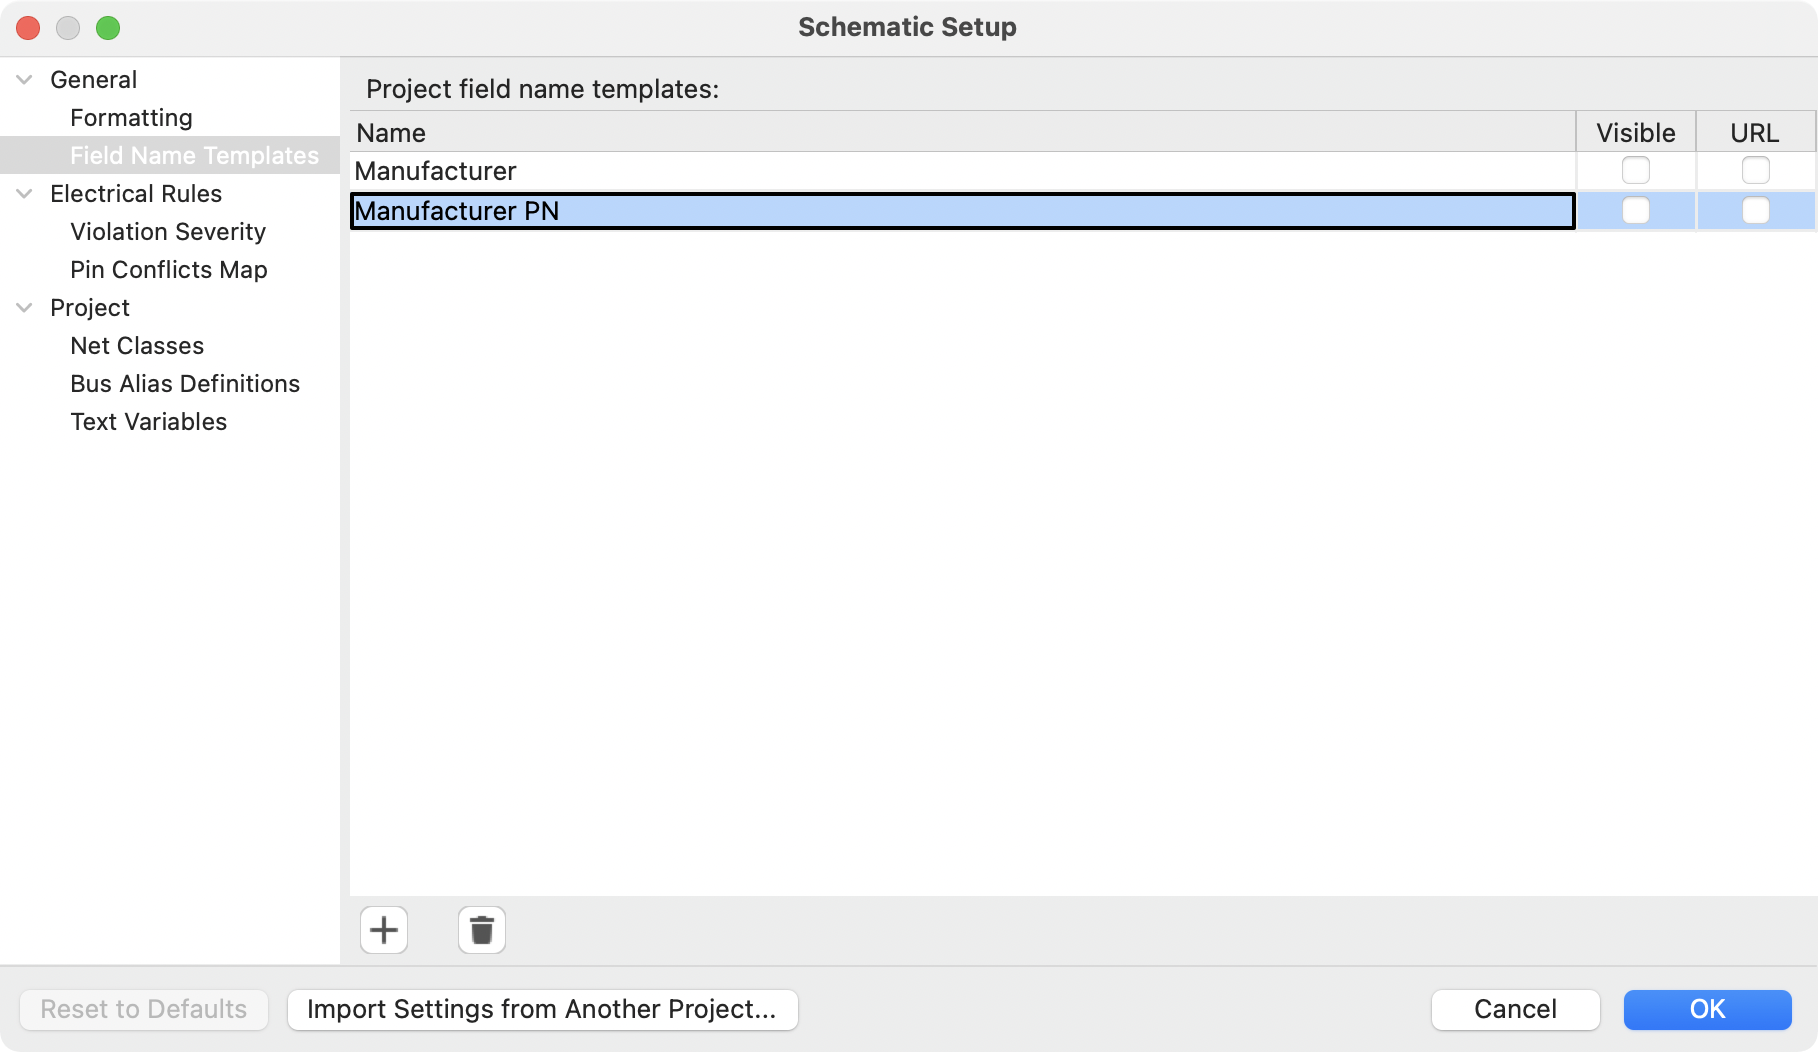 Schematic setup field name templates